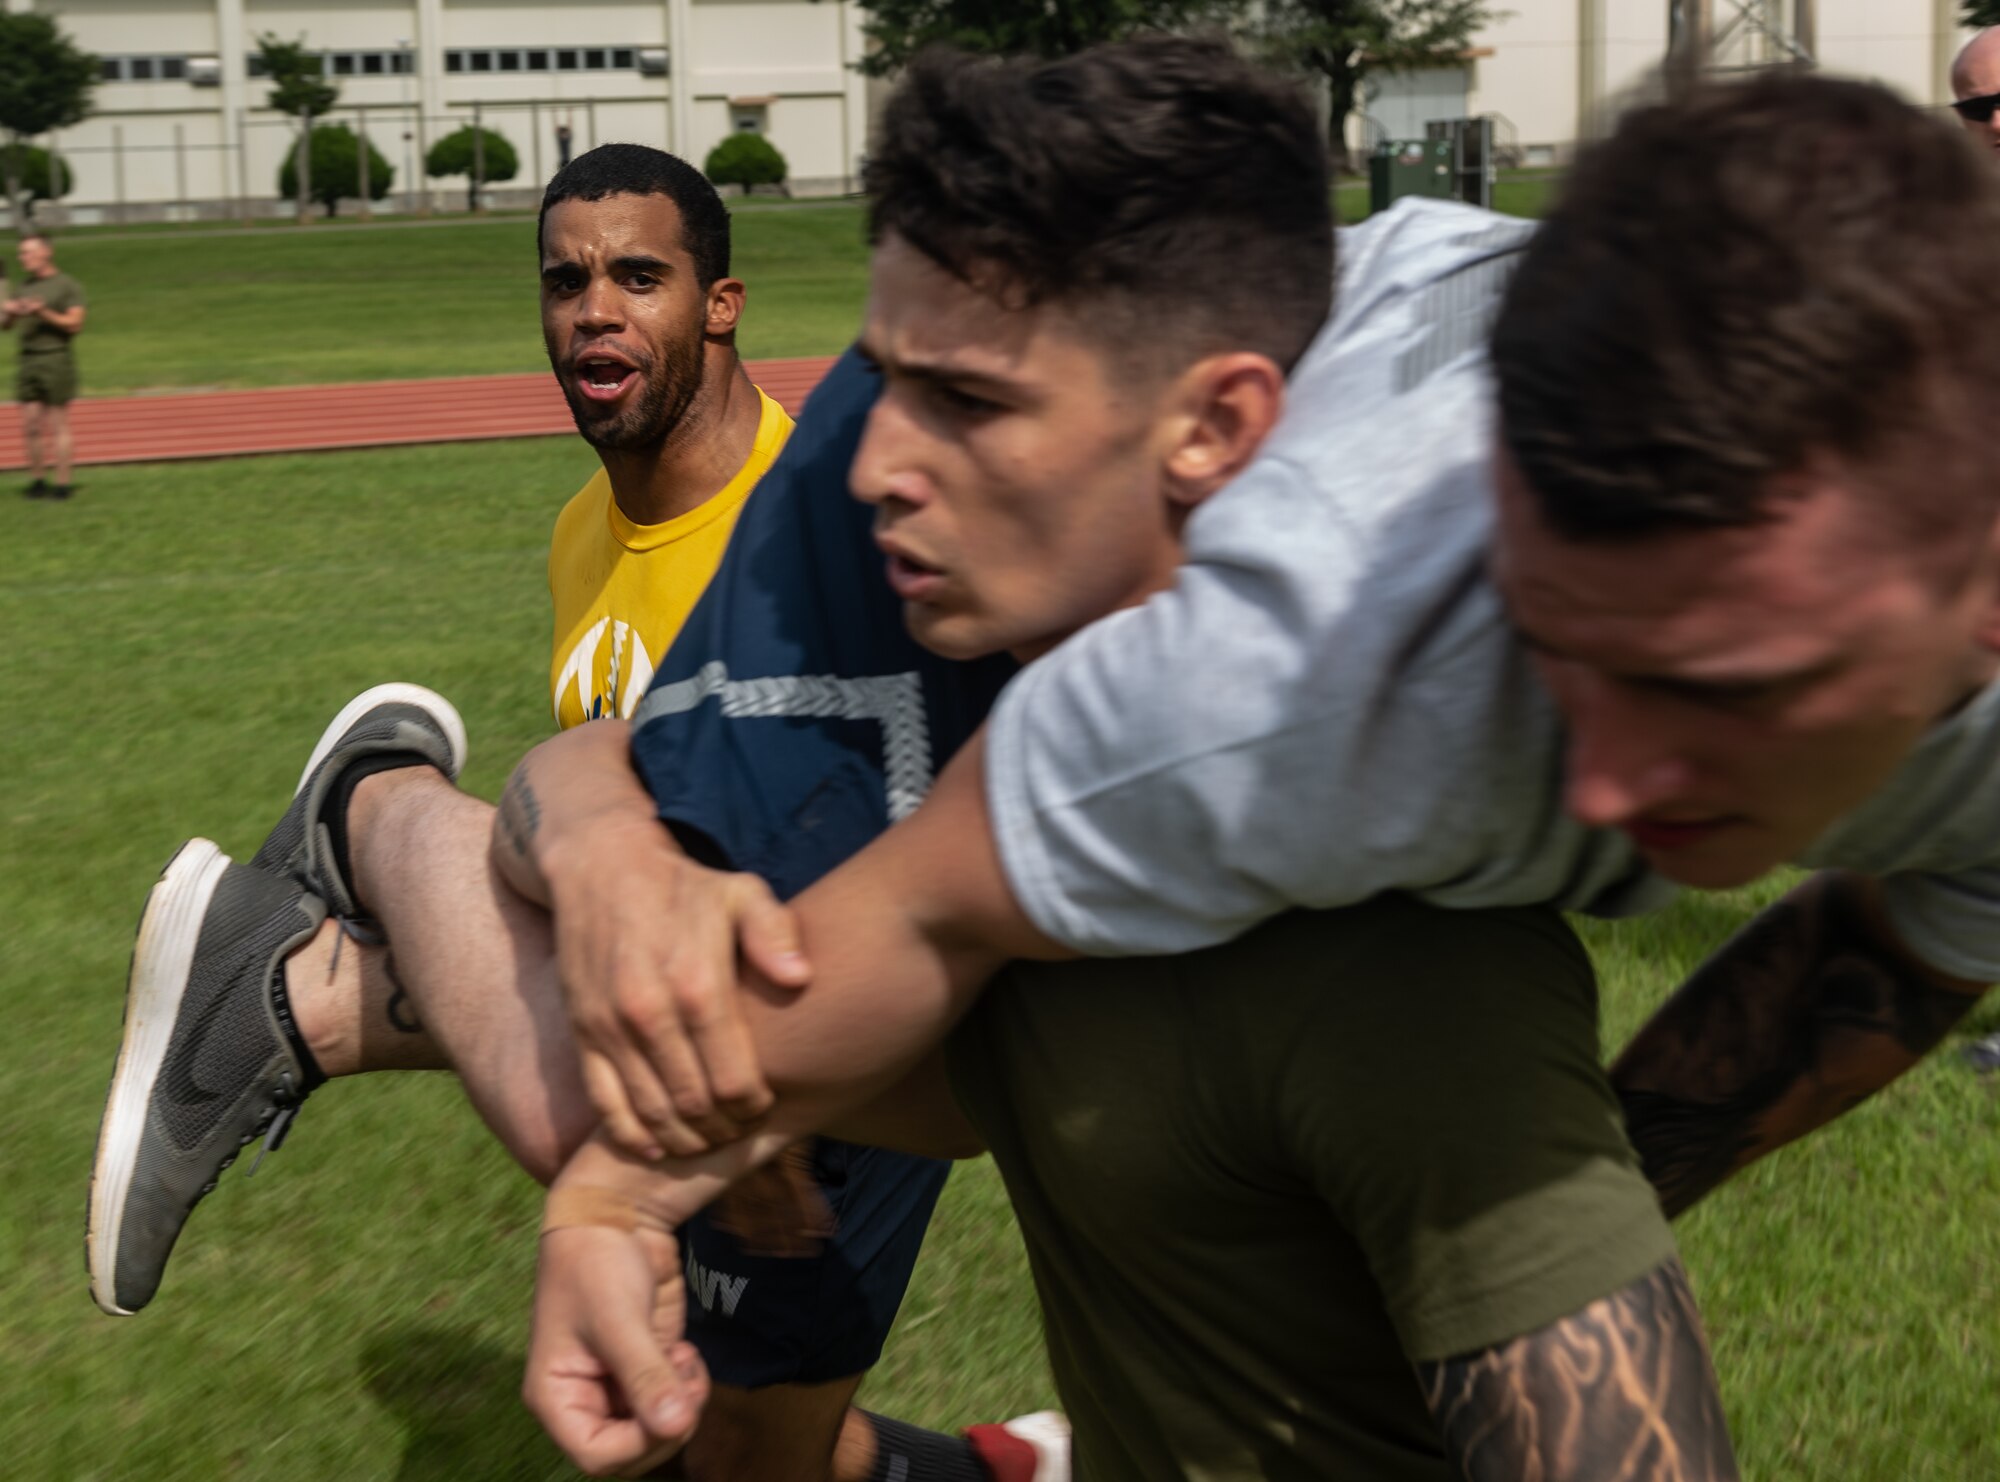 U.S. Navy Petty Officer 2nd Class Jesse Pedrero motivates U.S. Marine Corps Sgt. Cory Gargus while he carries U.S. Air Force Staff Sgt. Monty Baze, Okinawa Joint Experience Green Team students, during the Okinawa Joint Fitness Challenge Sept. 26, 2018, at Kadena Air Base, Japan. Service members from the Army, Navy, Air Force and Marine Corps were equally broken up into four classes to provide a joint learning environment. (U.S. Air Force photo by Staff Sgt. Micaiah Anthony)